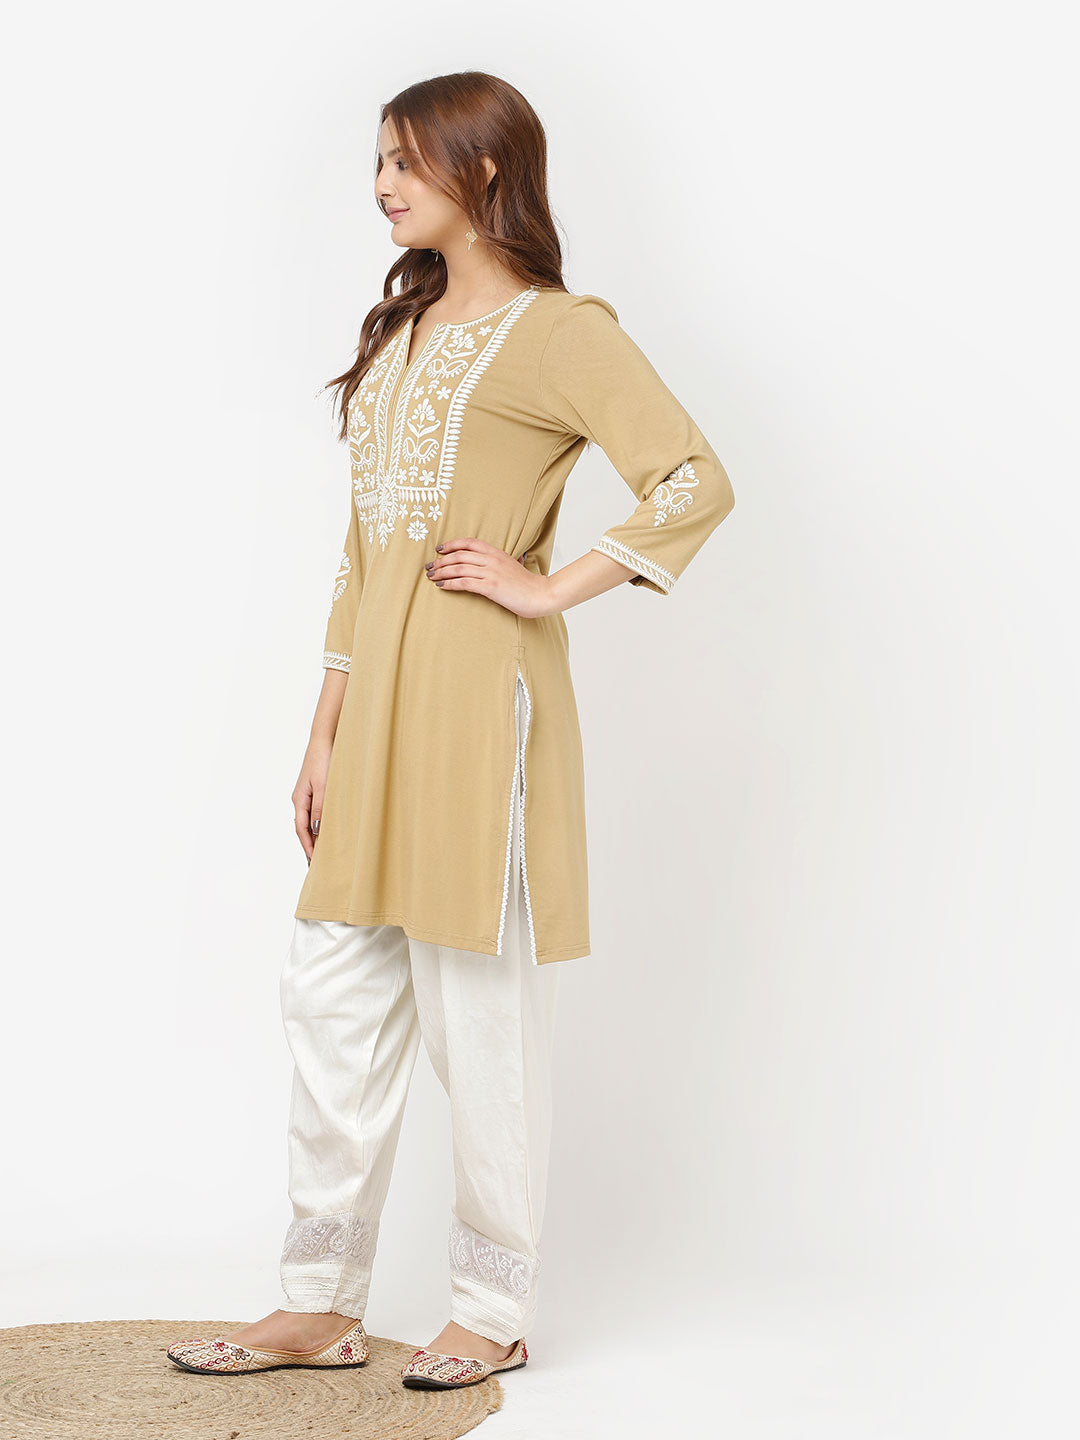 Golden Kurta for Women with Threadwork and Lace Detailing